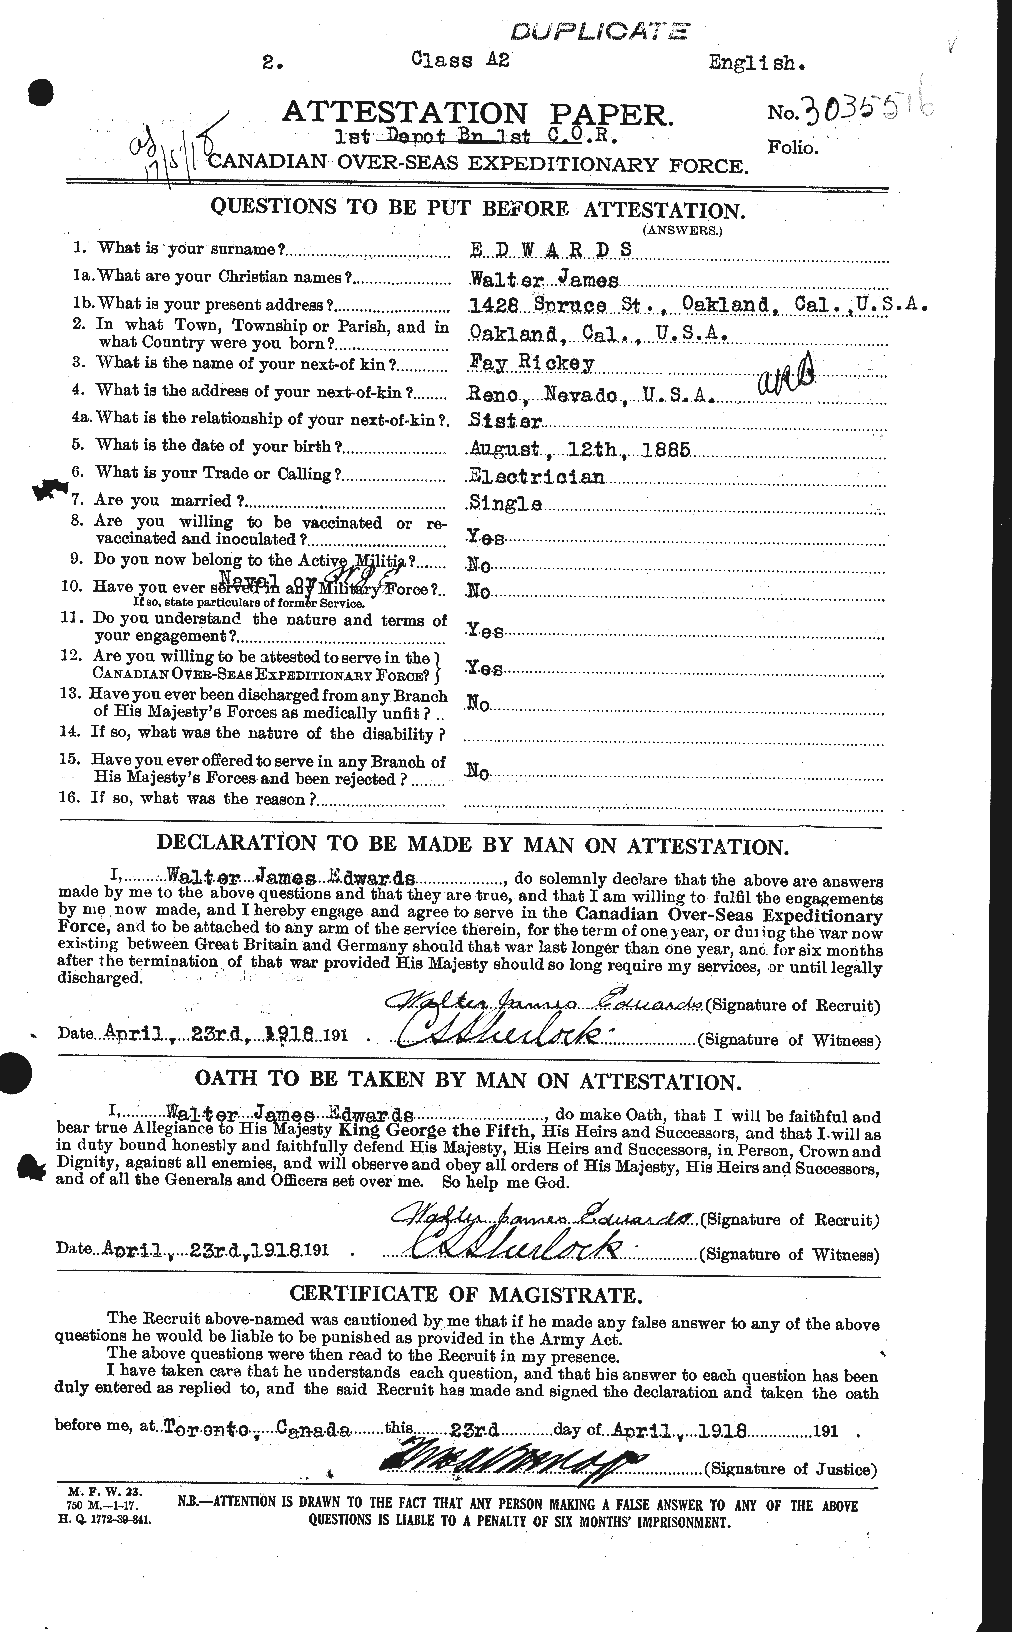 Personnel Records of the First World War - CEF 310374a